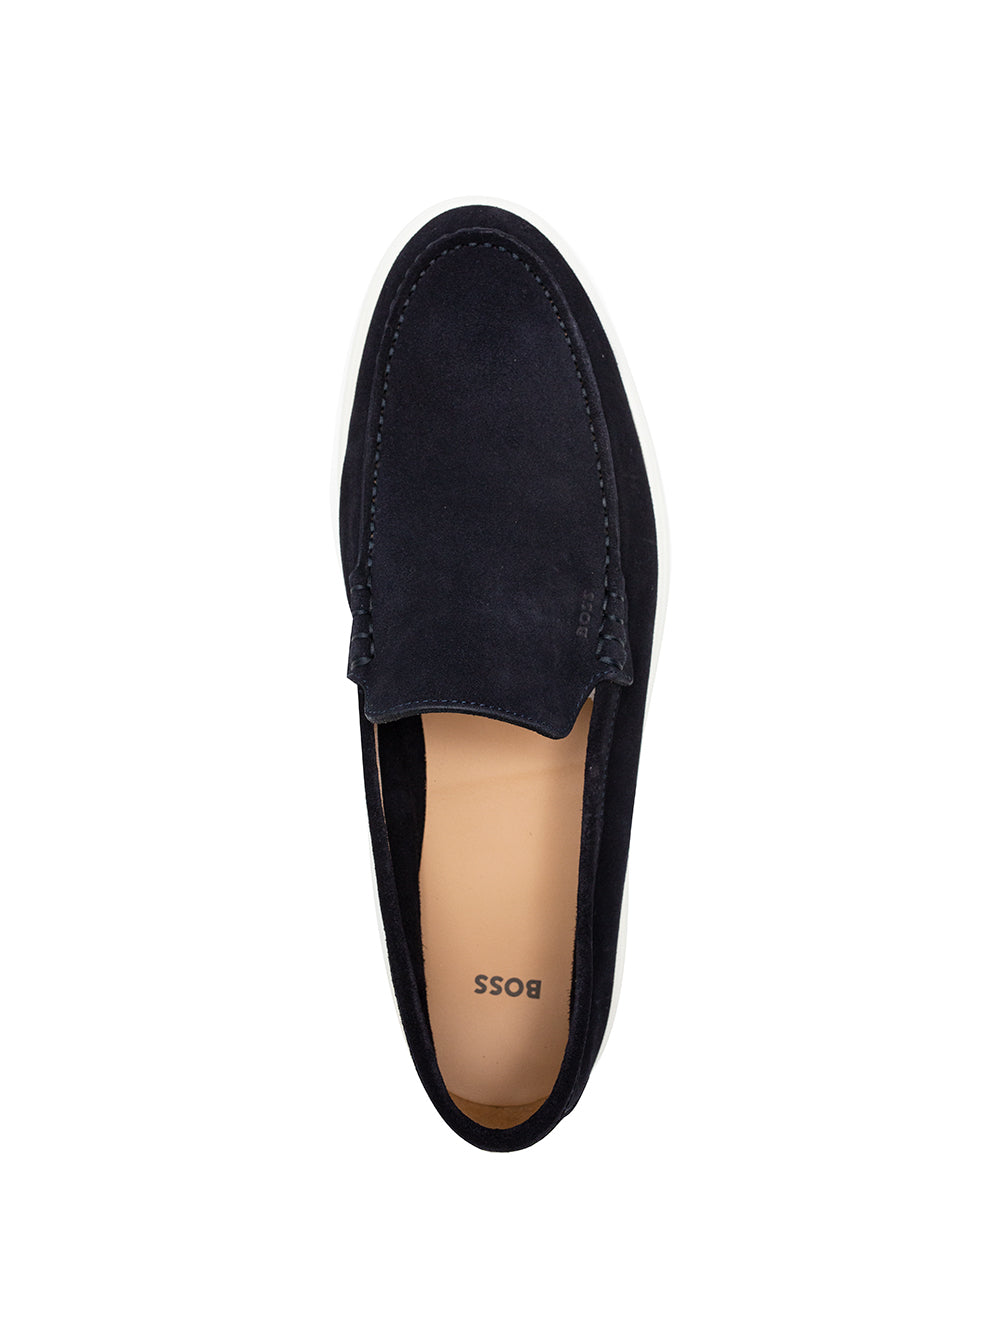 Sienne Moccasins Casual Slip Ons Navy